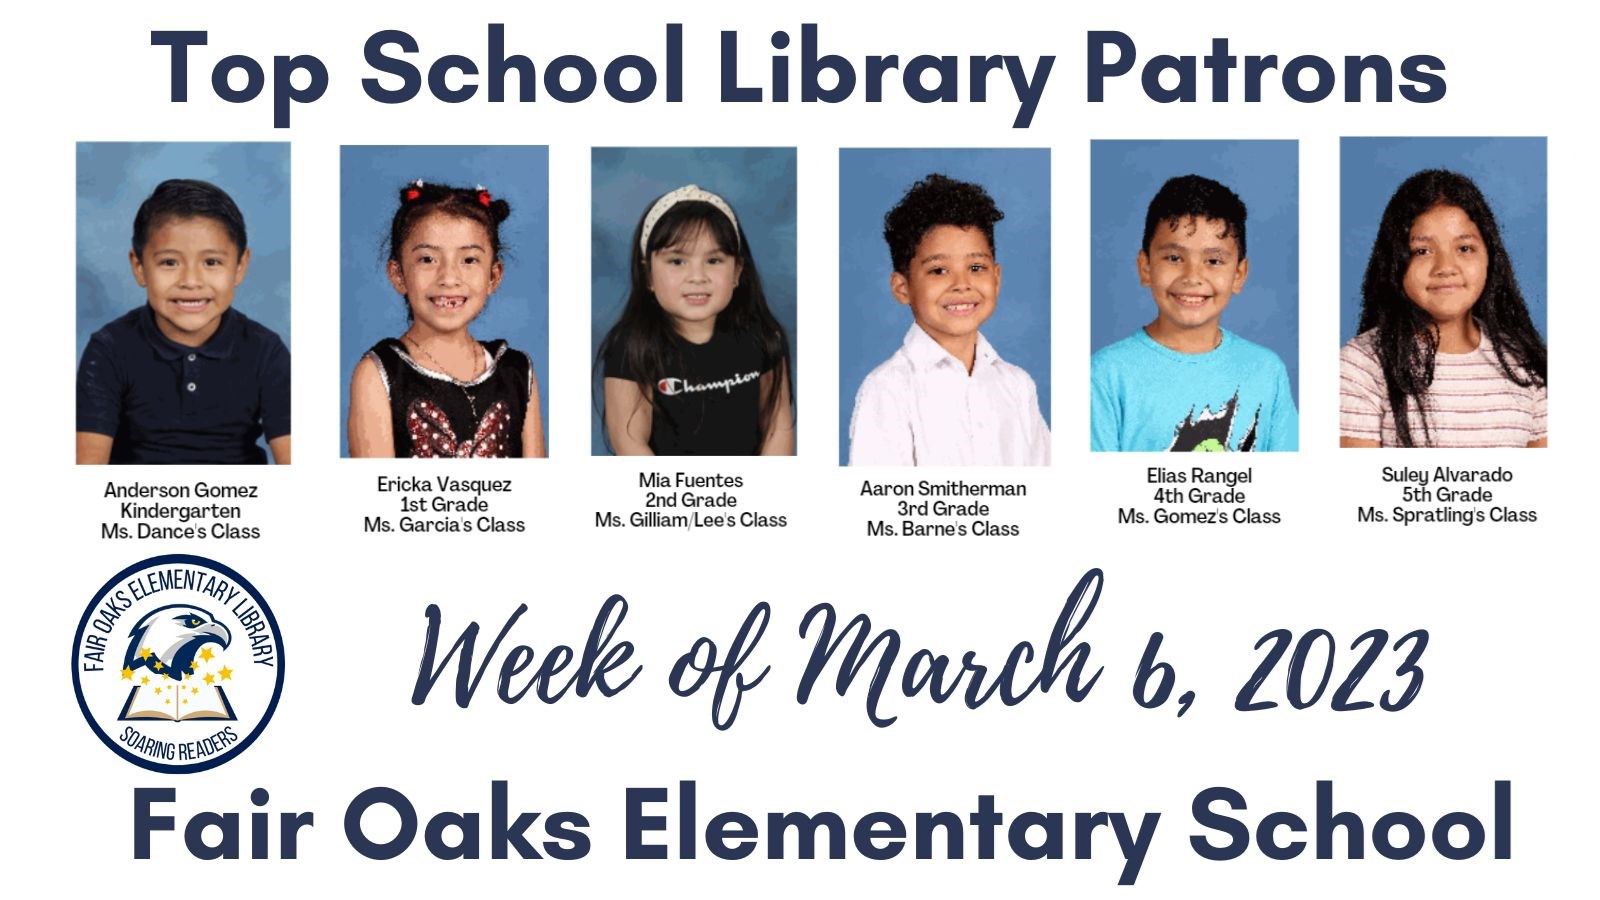 Top Library Patrons for Week of March 6th